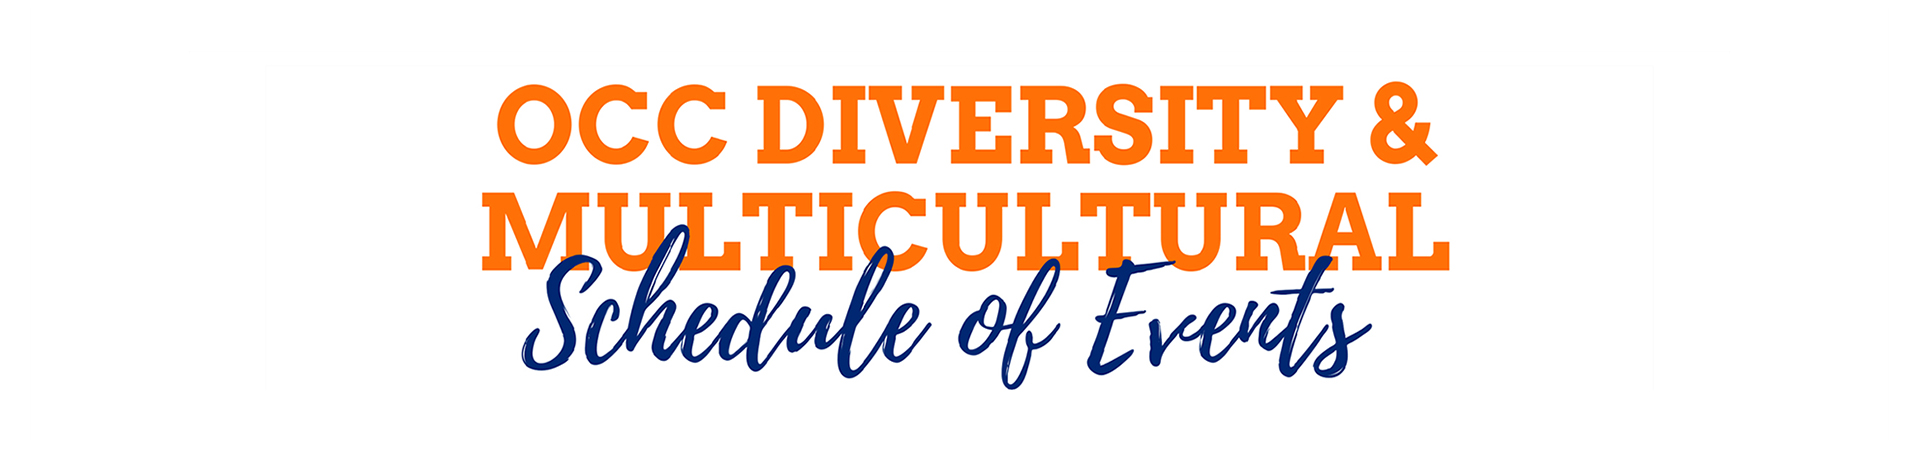 Text: OCC Diversity & Multicultural Schedule of Events